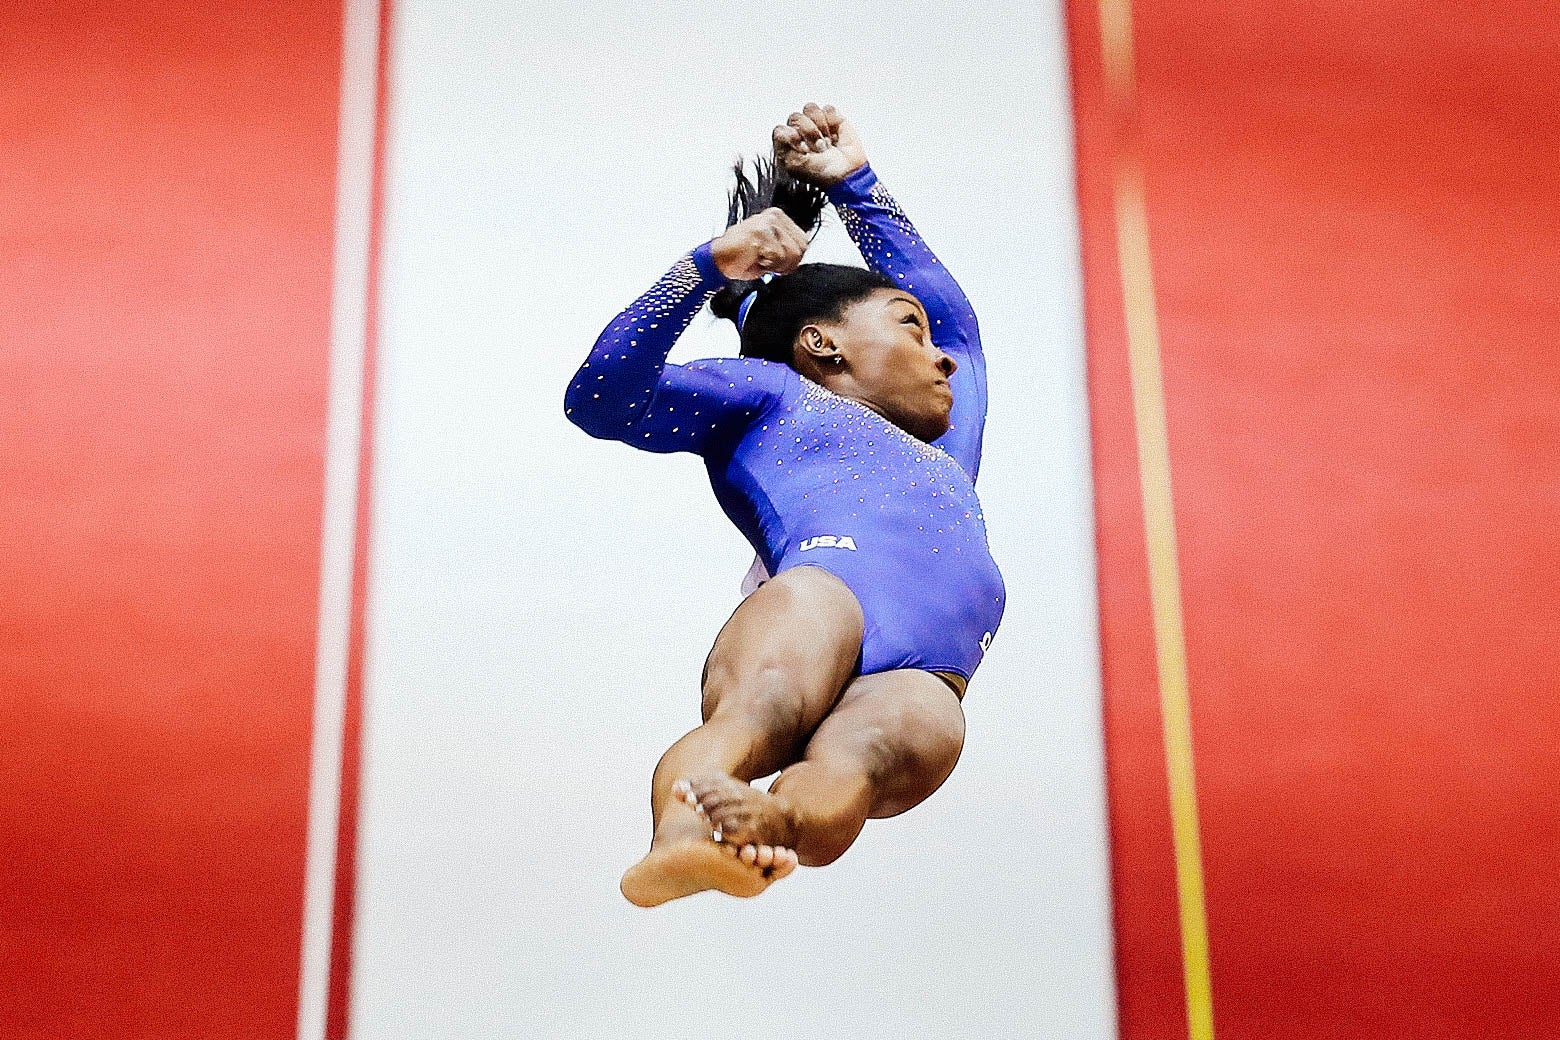 Simone Biles, mid-vault. The angle of the image makes it unclear as to whether it was the Biles.